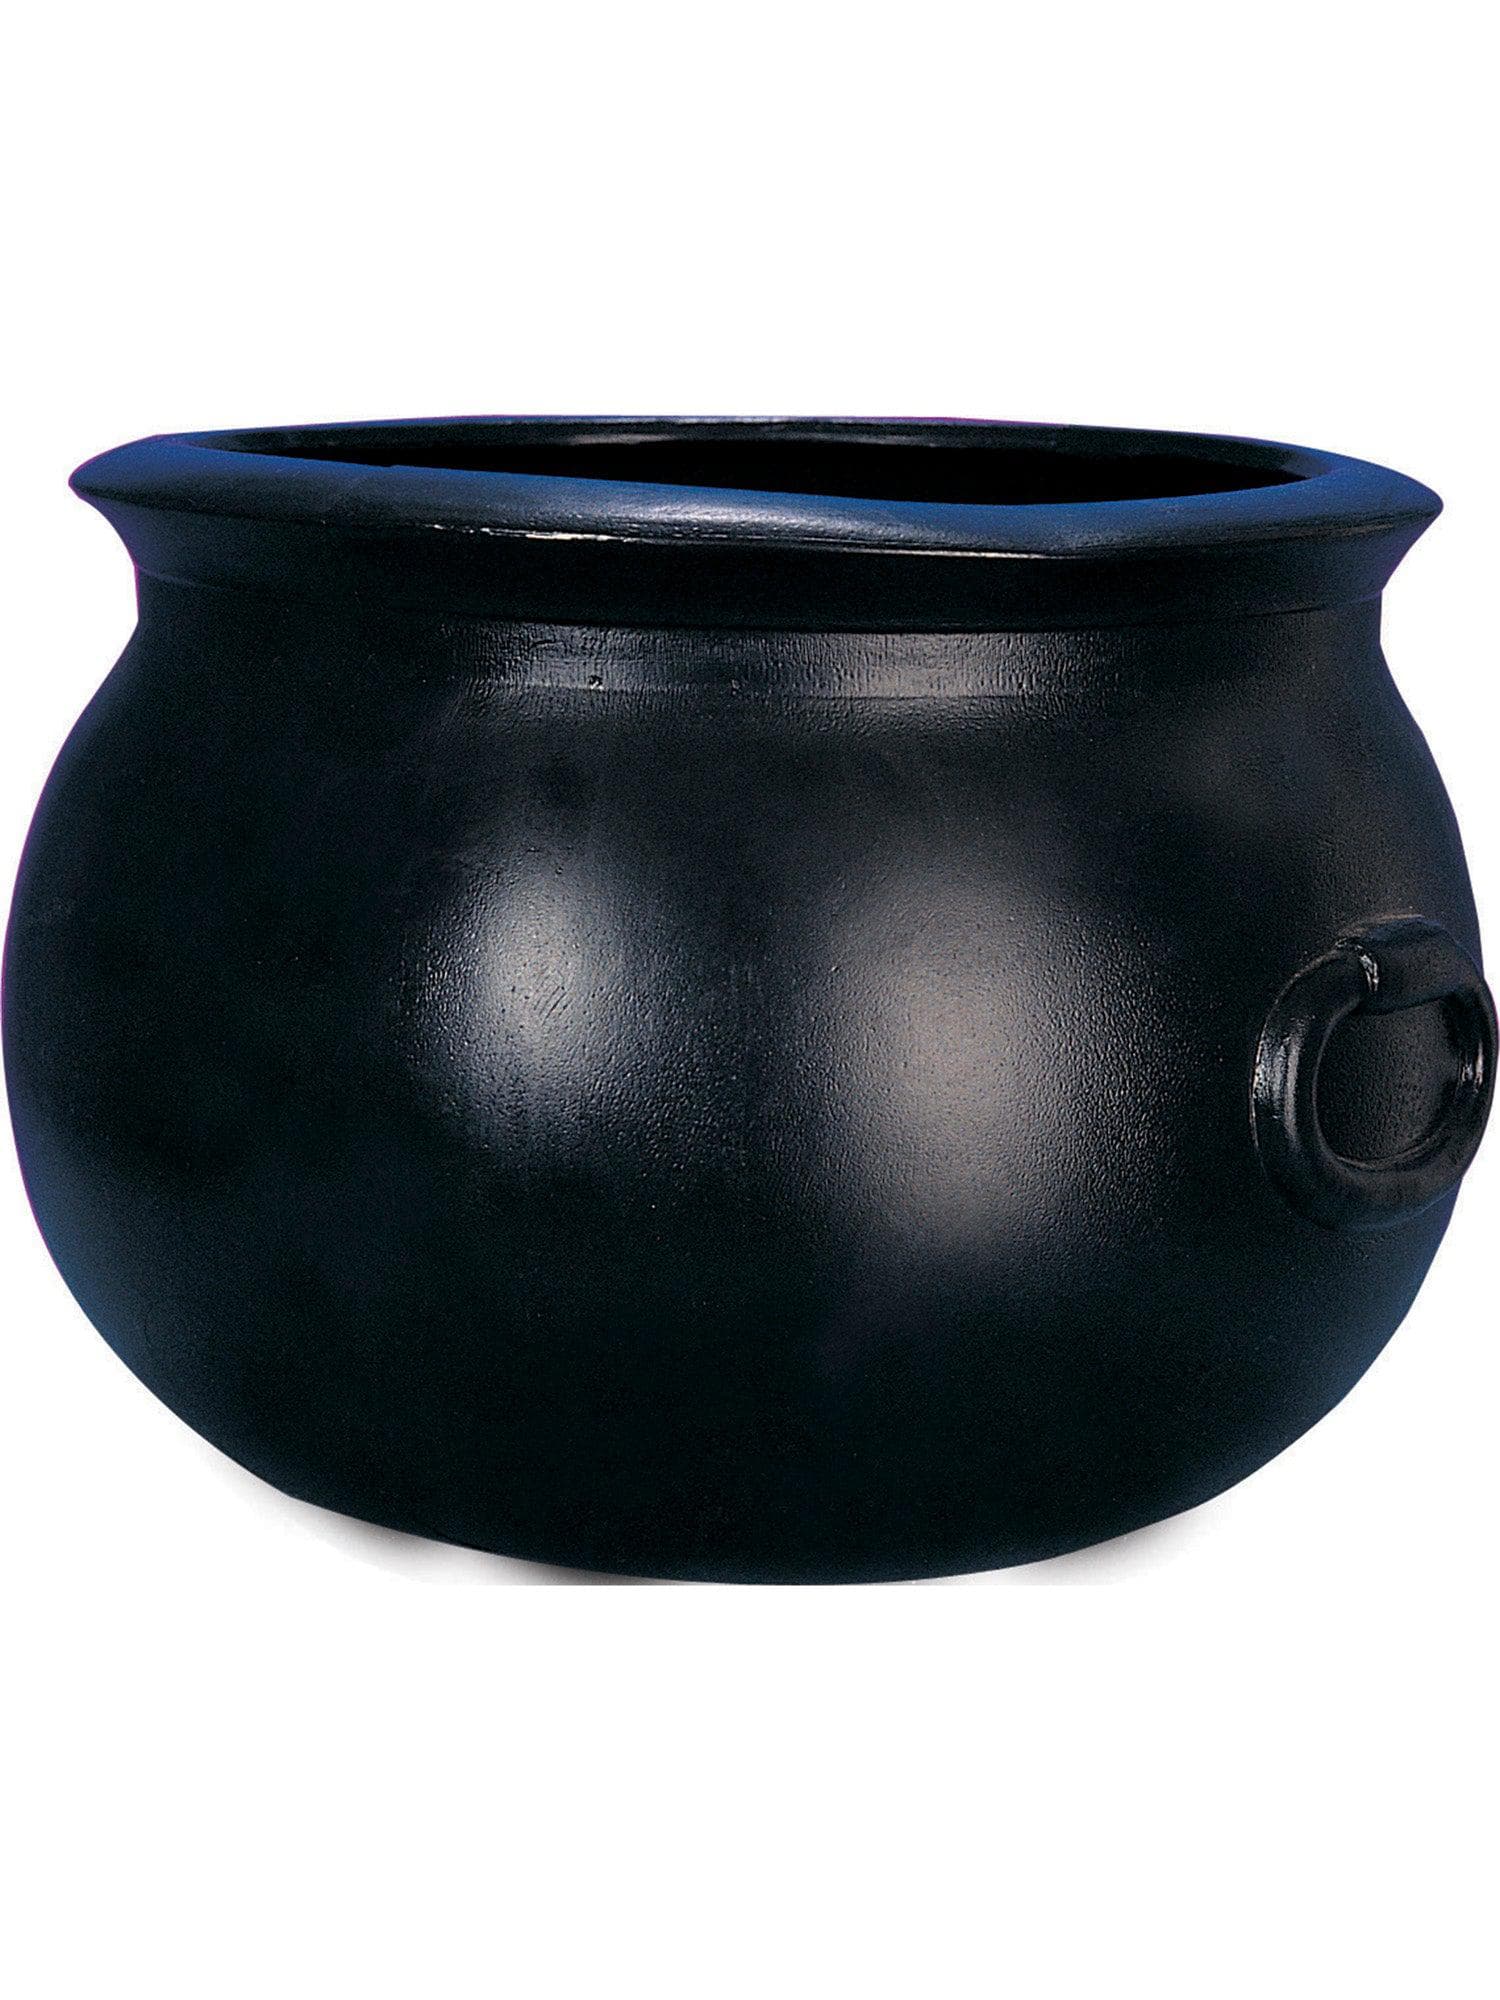 16-inch Black Witch Cauldron Candy Bucket - costumes.com